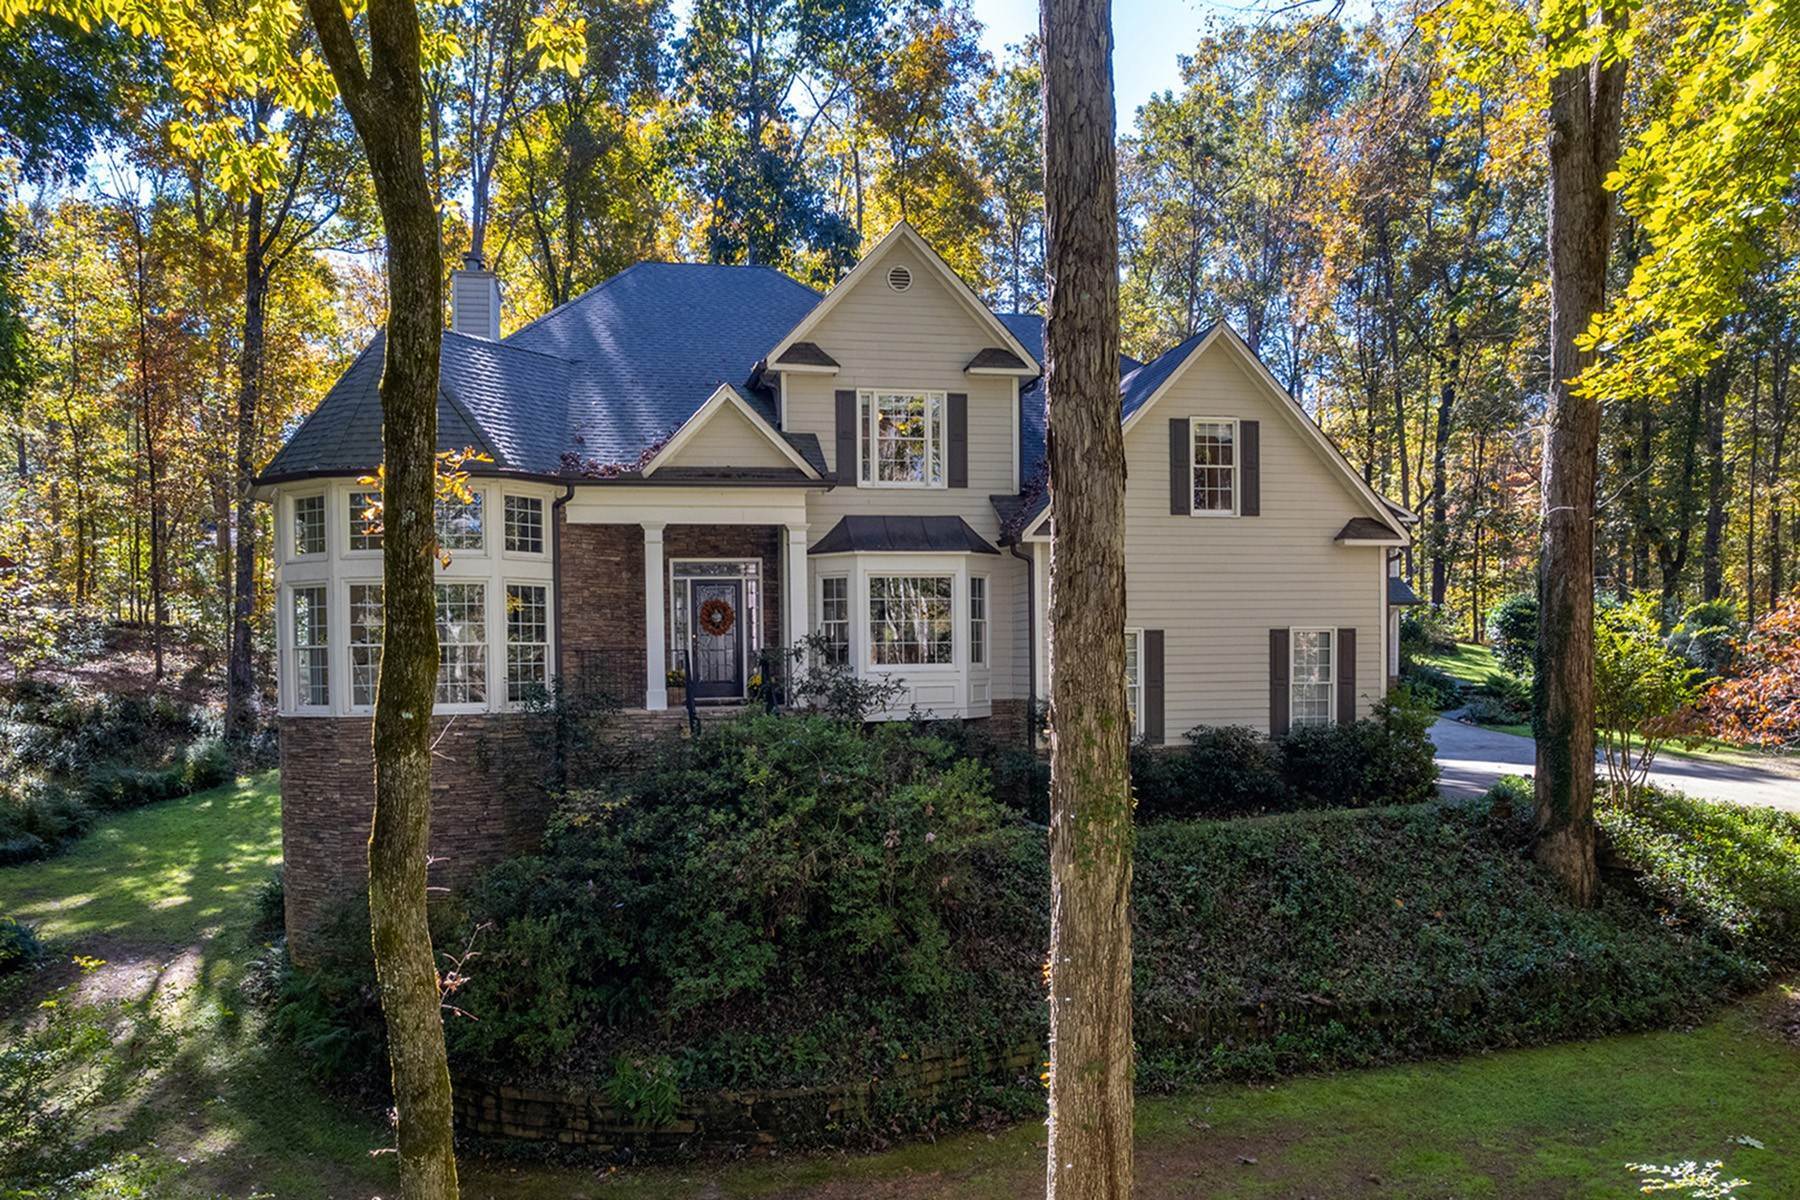 Single Family Homes for Sale at Gorgeous Cape Cod Home on Large Lot 550 Eagles Landing Drive Alpharetta, Georgia 30004 United States